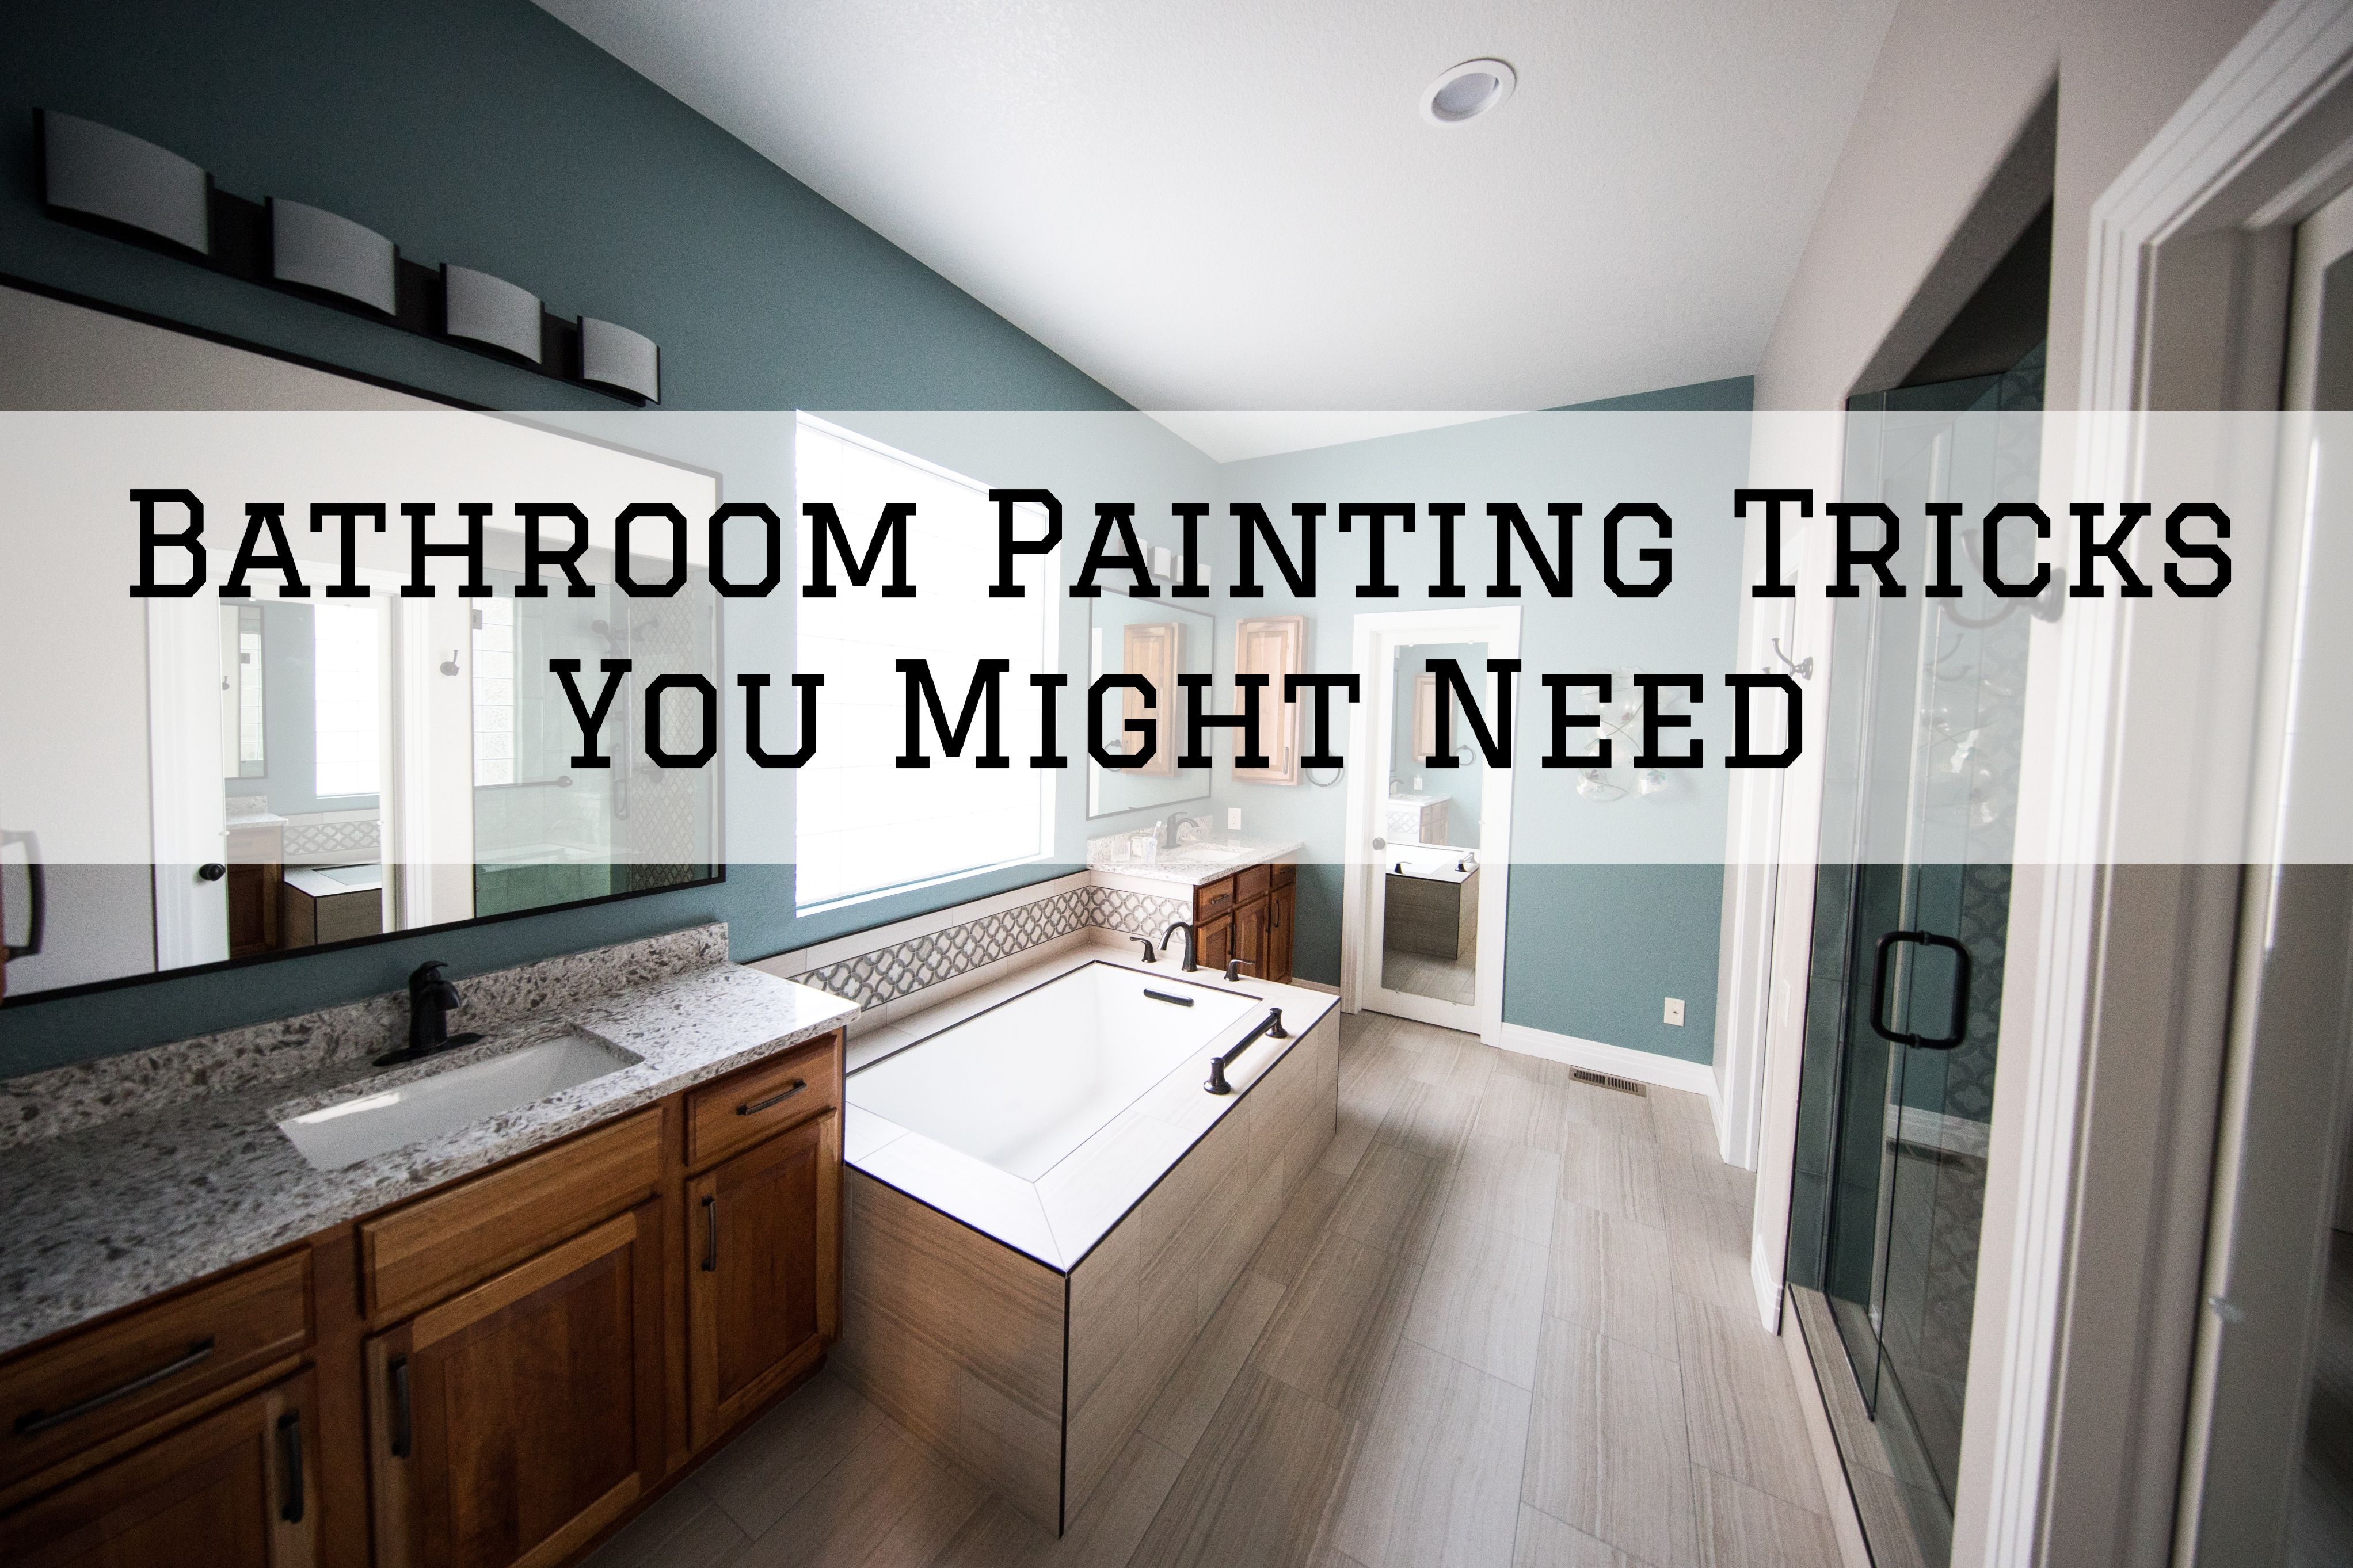 Bathroom Painting Tricks You Might Need in Ottawa, Ontario